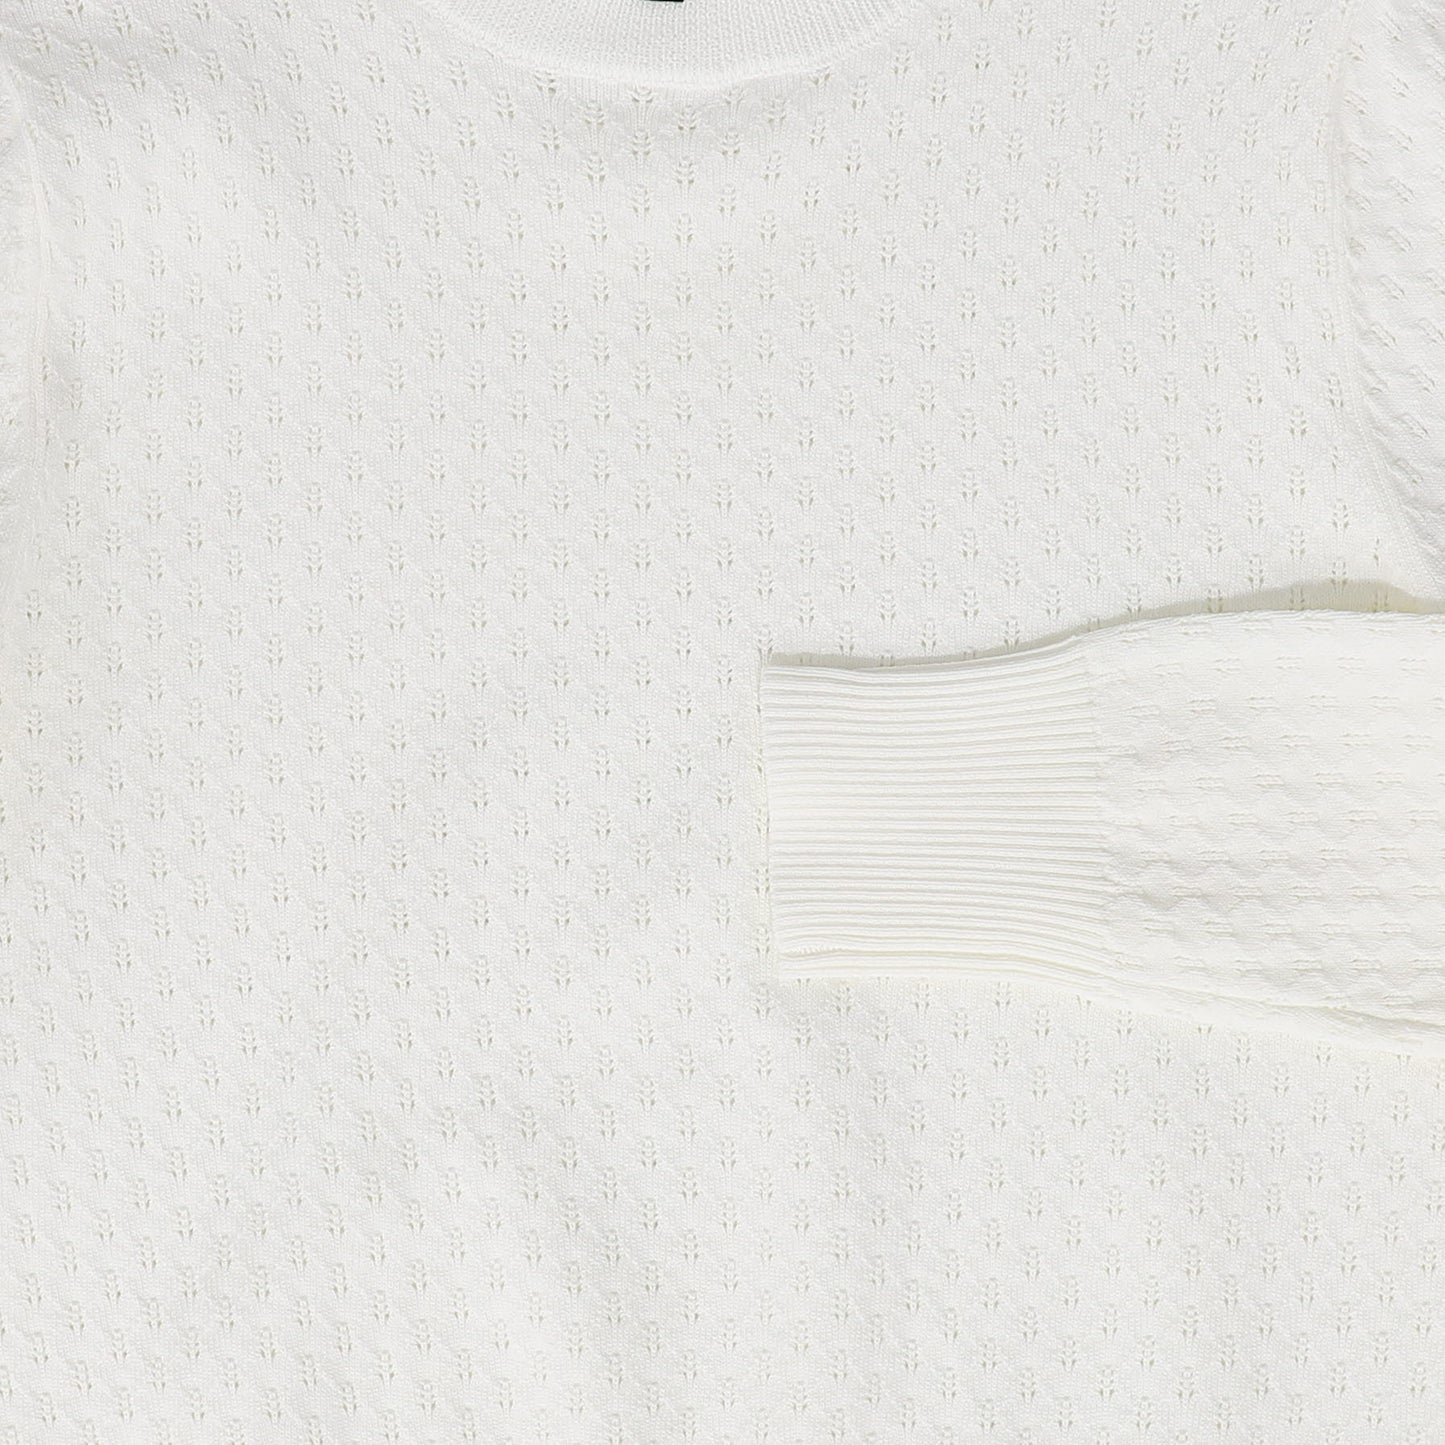 BAMBOO WHITE POINTELLE SWEATER